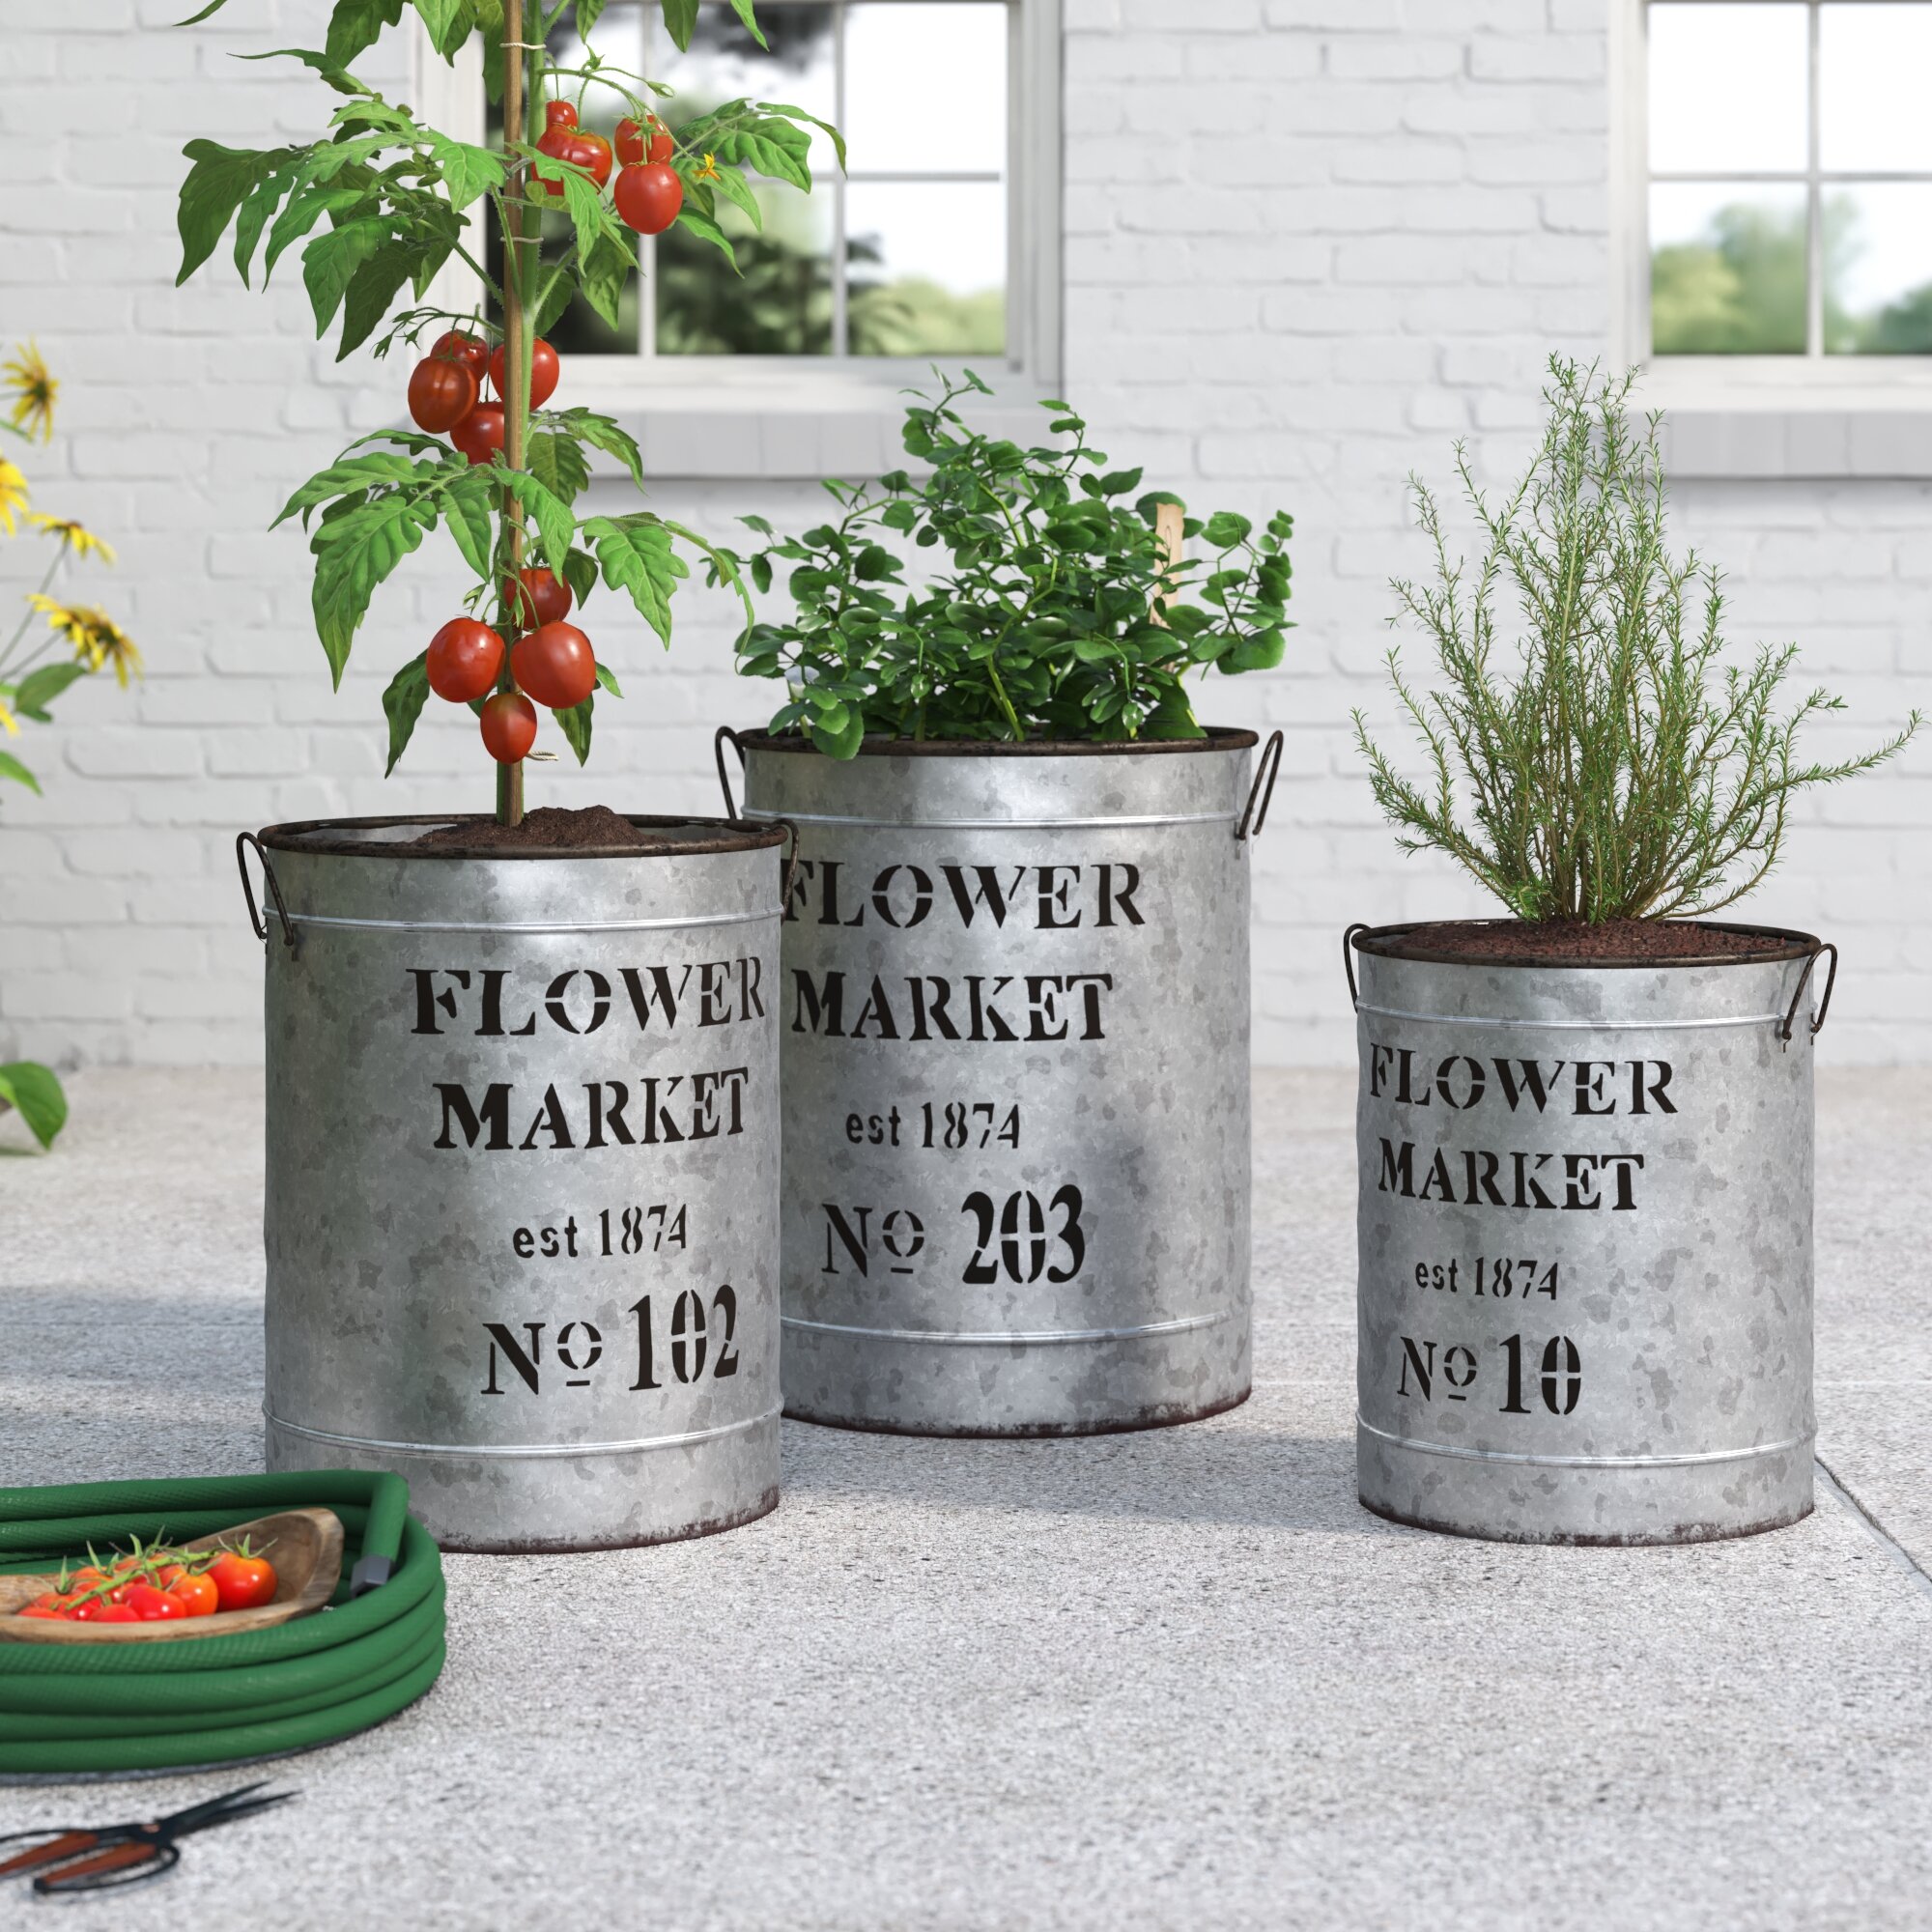 Sego Decorative Round Metal Buckets with Handles and Flower Market Text